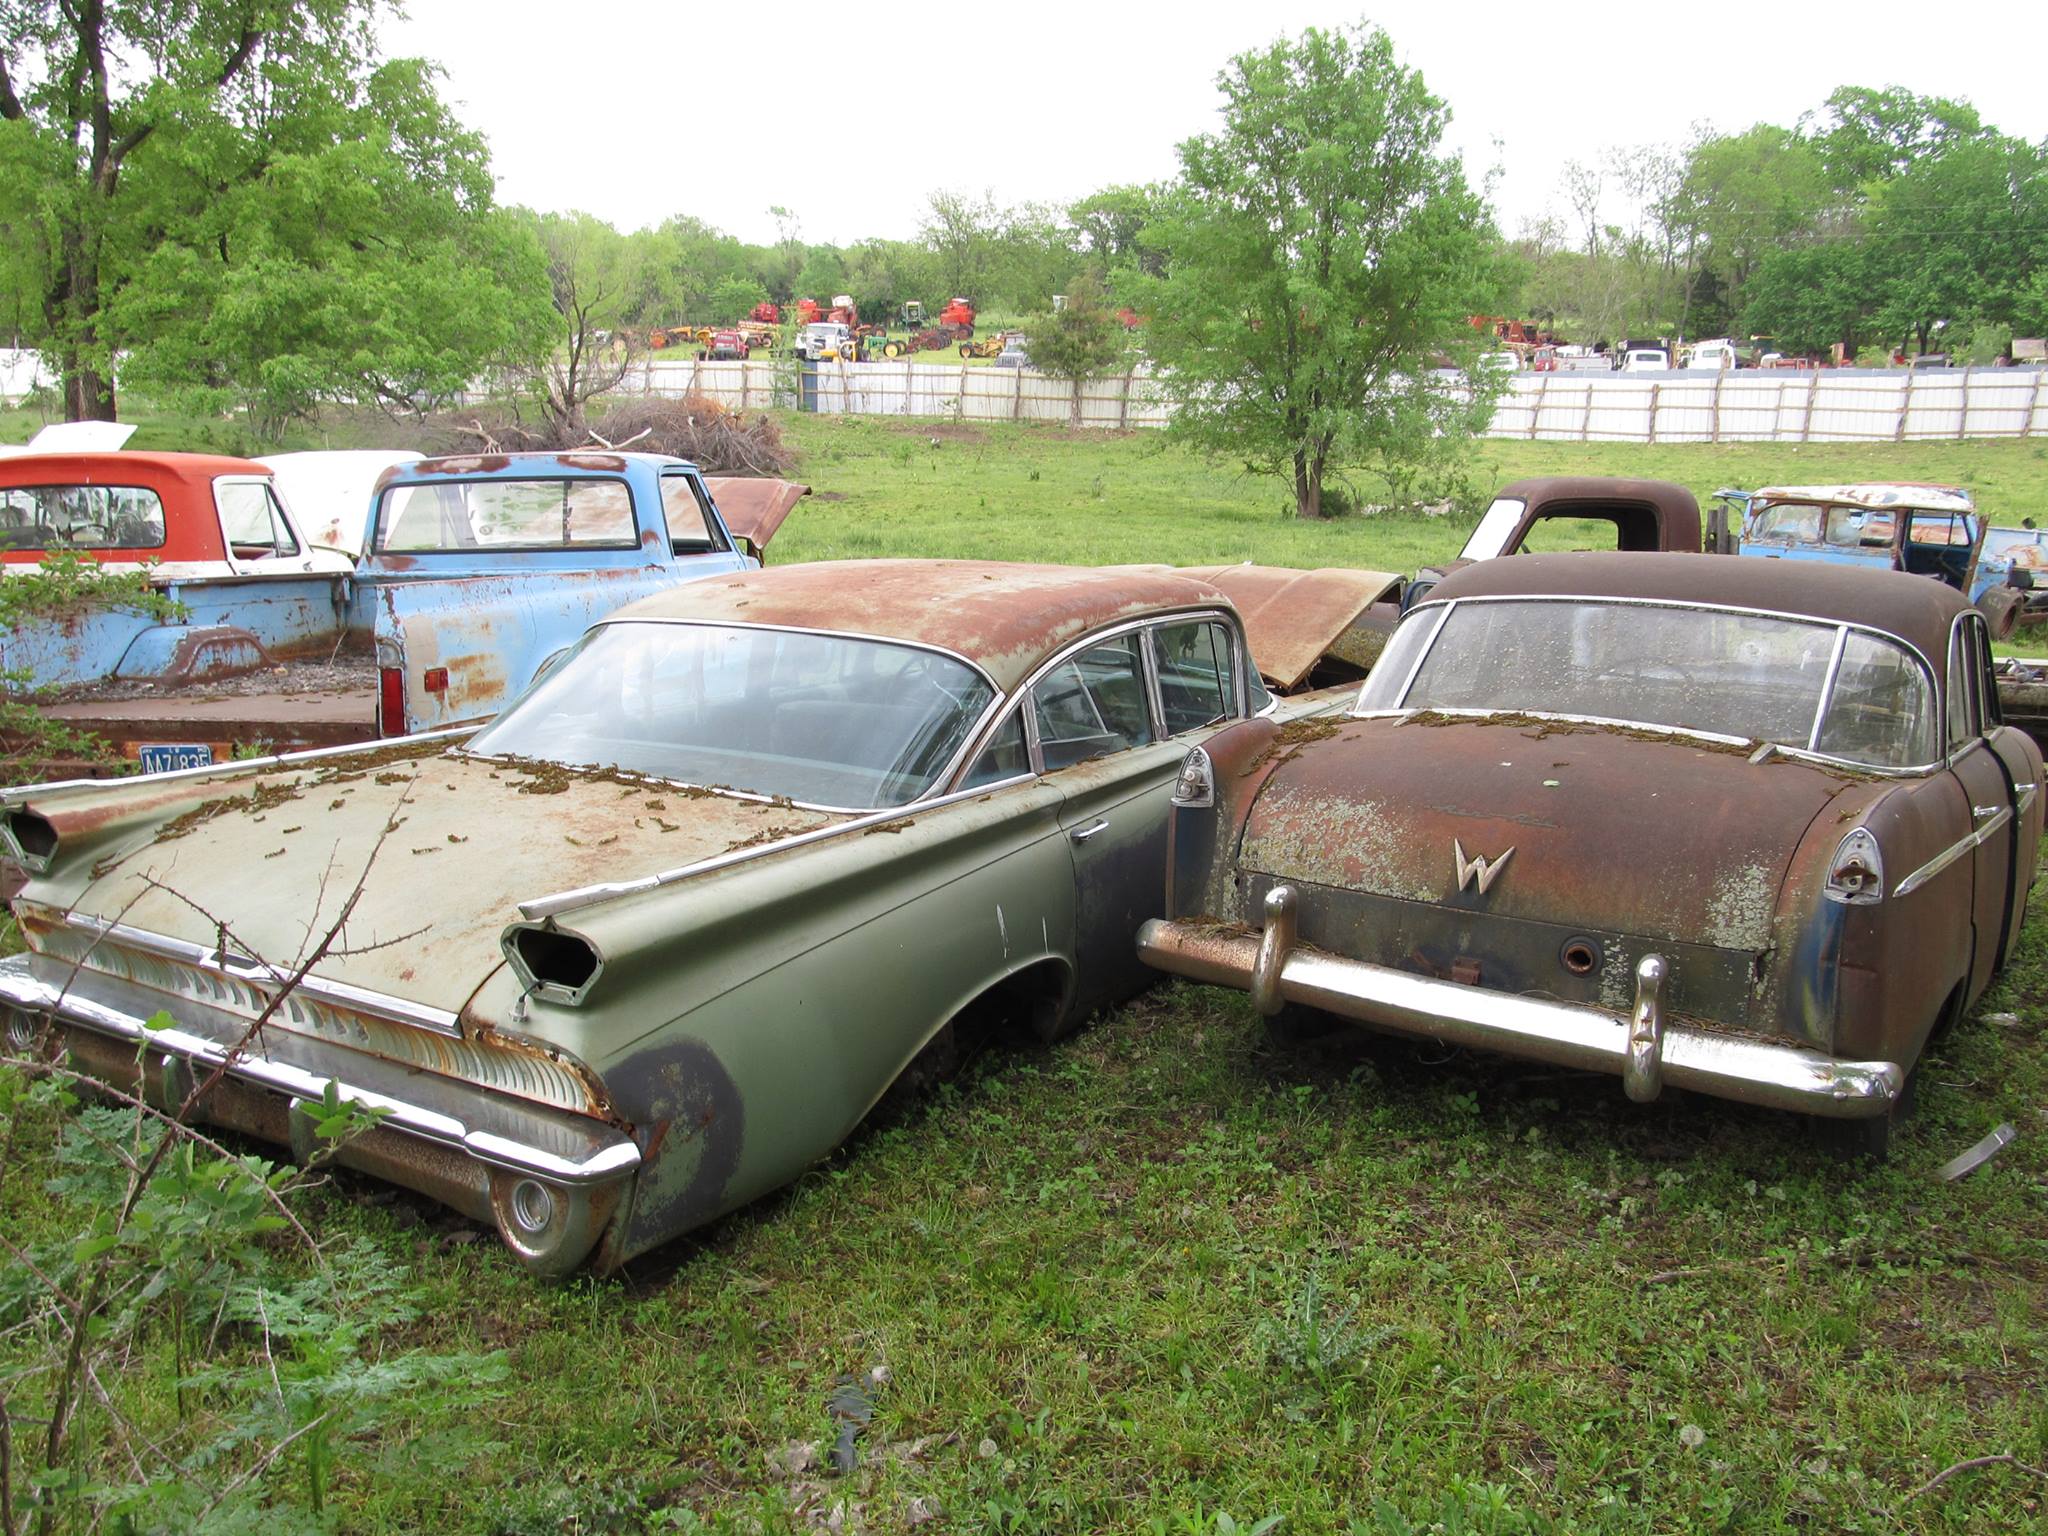 Ford salvage yard in oklahoma